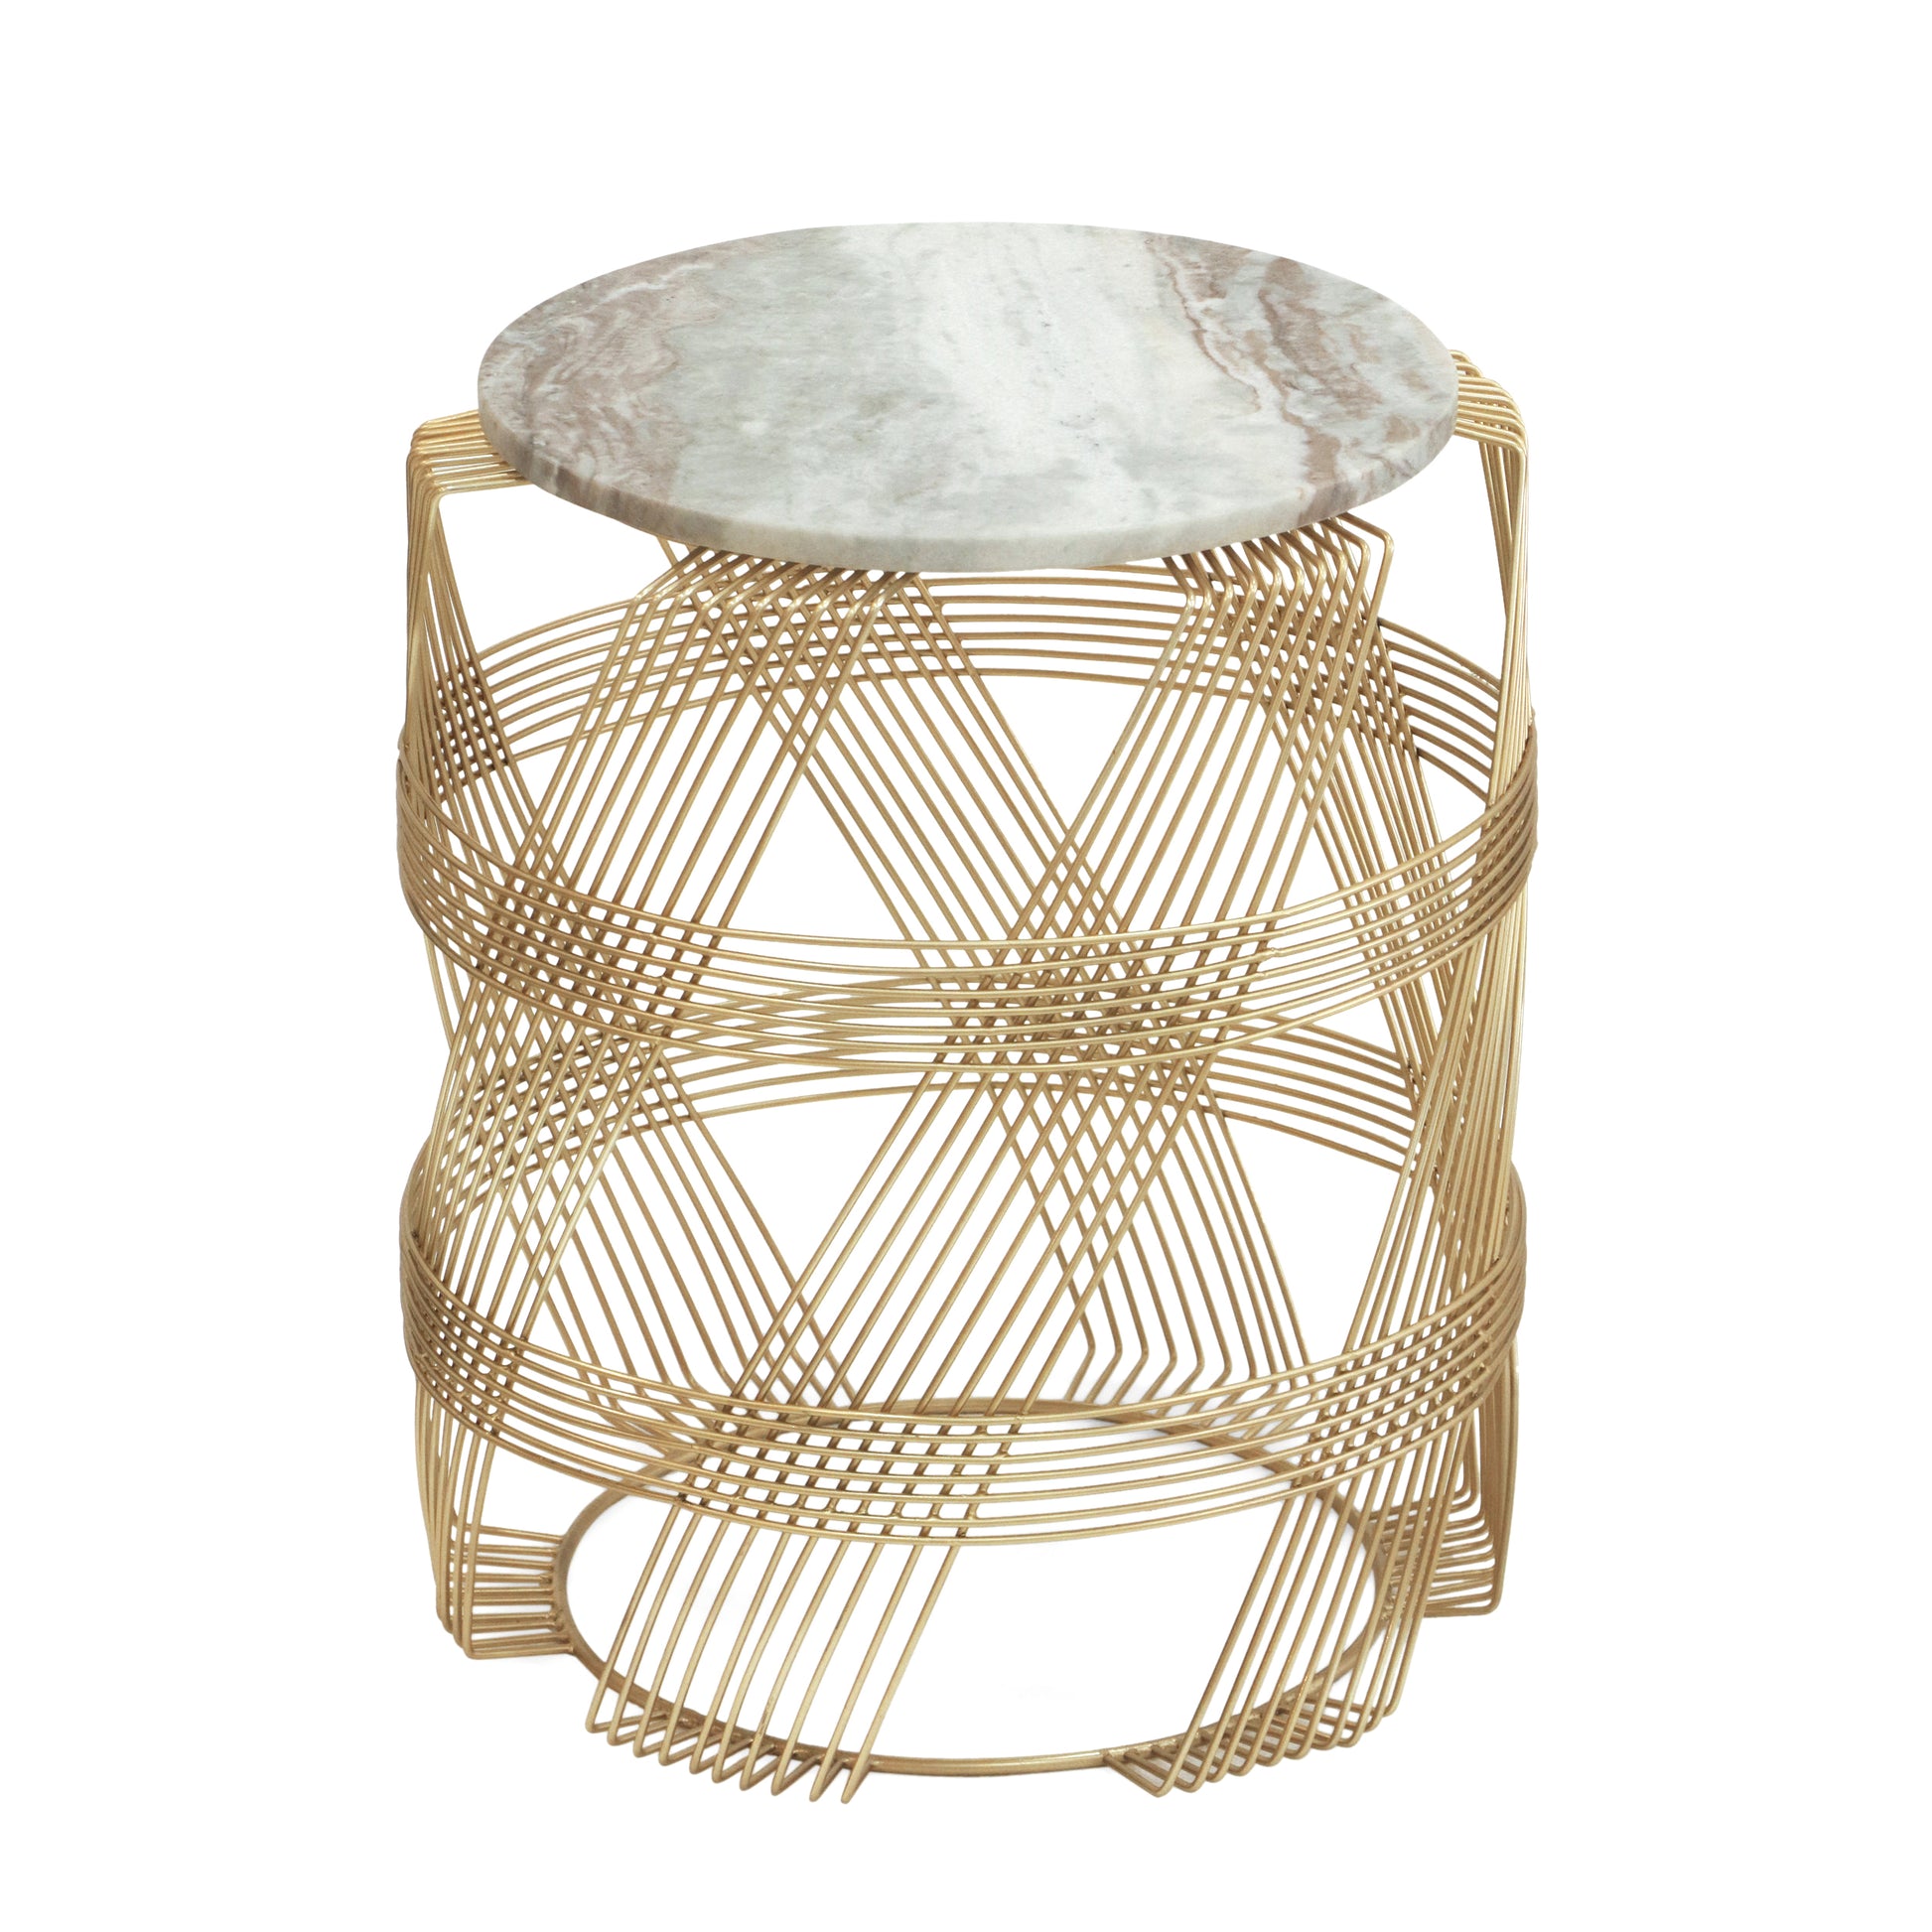 Round Wire Table With Marble Top - Gold Marble